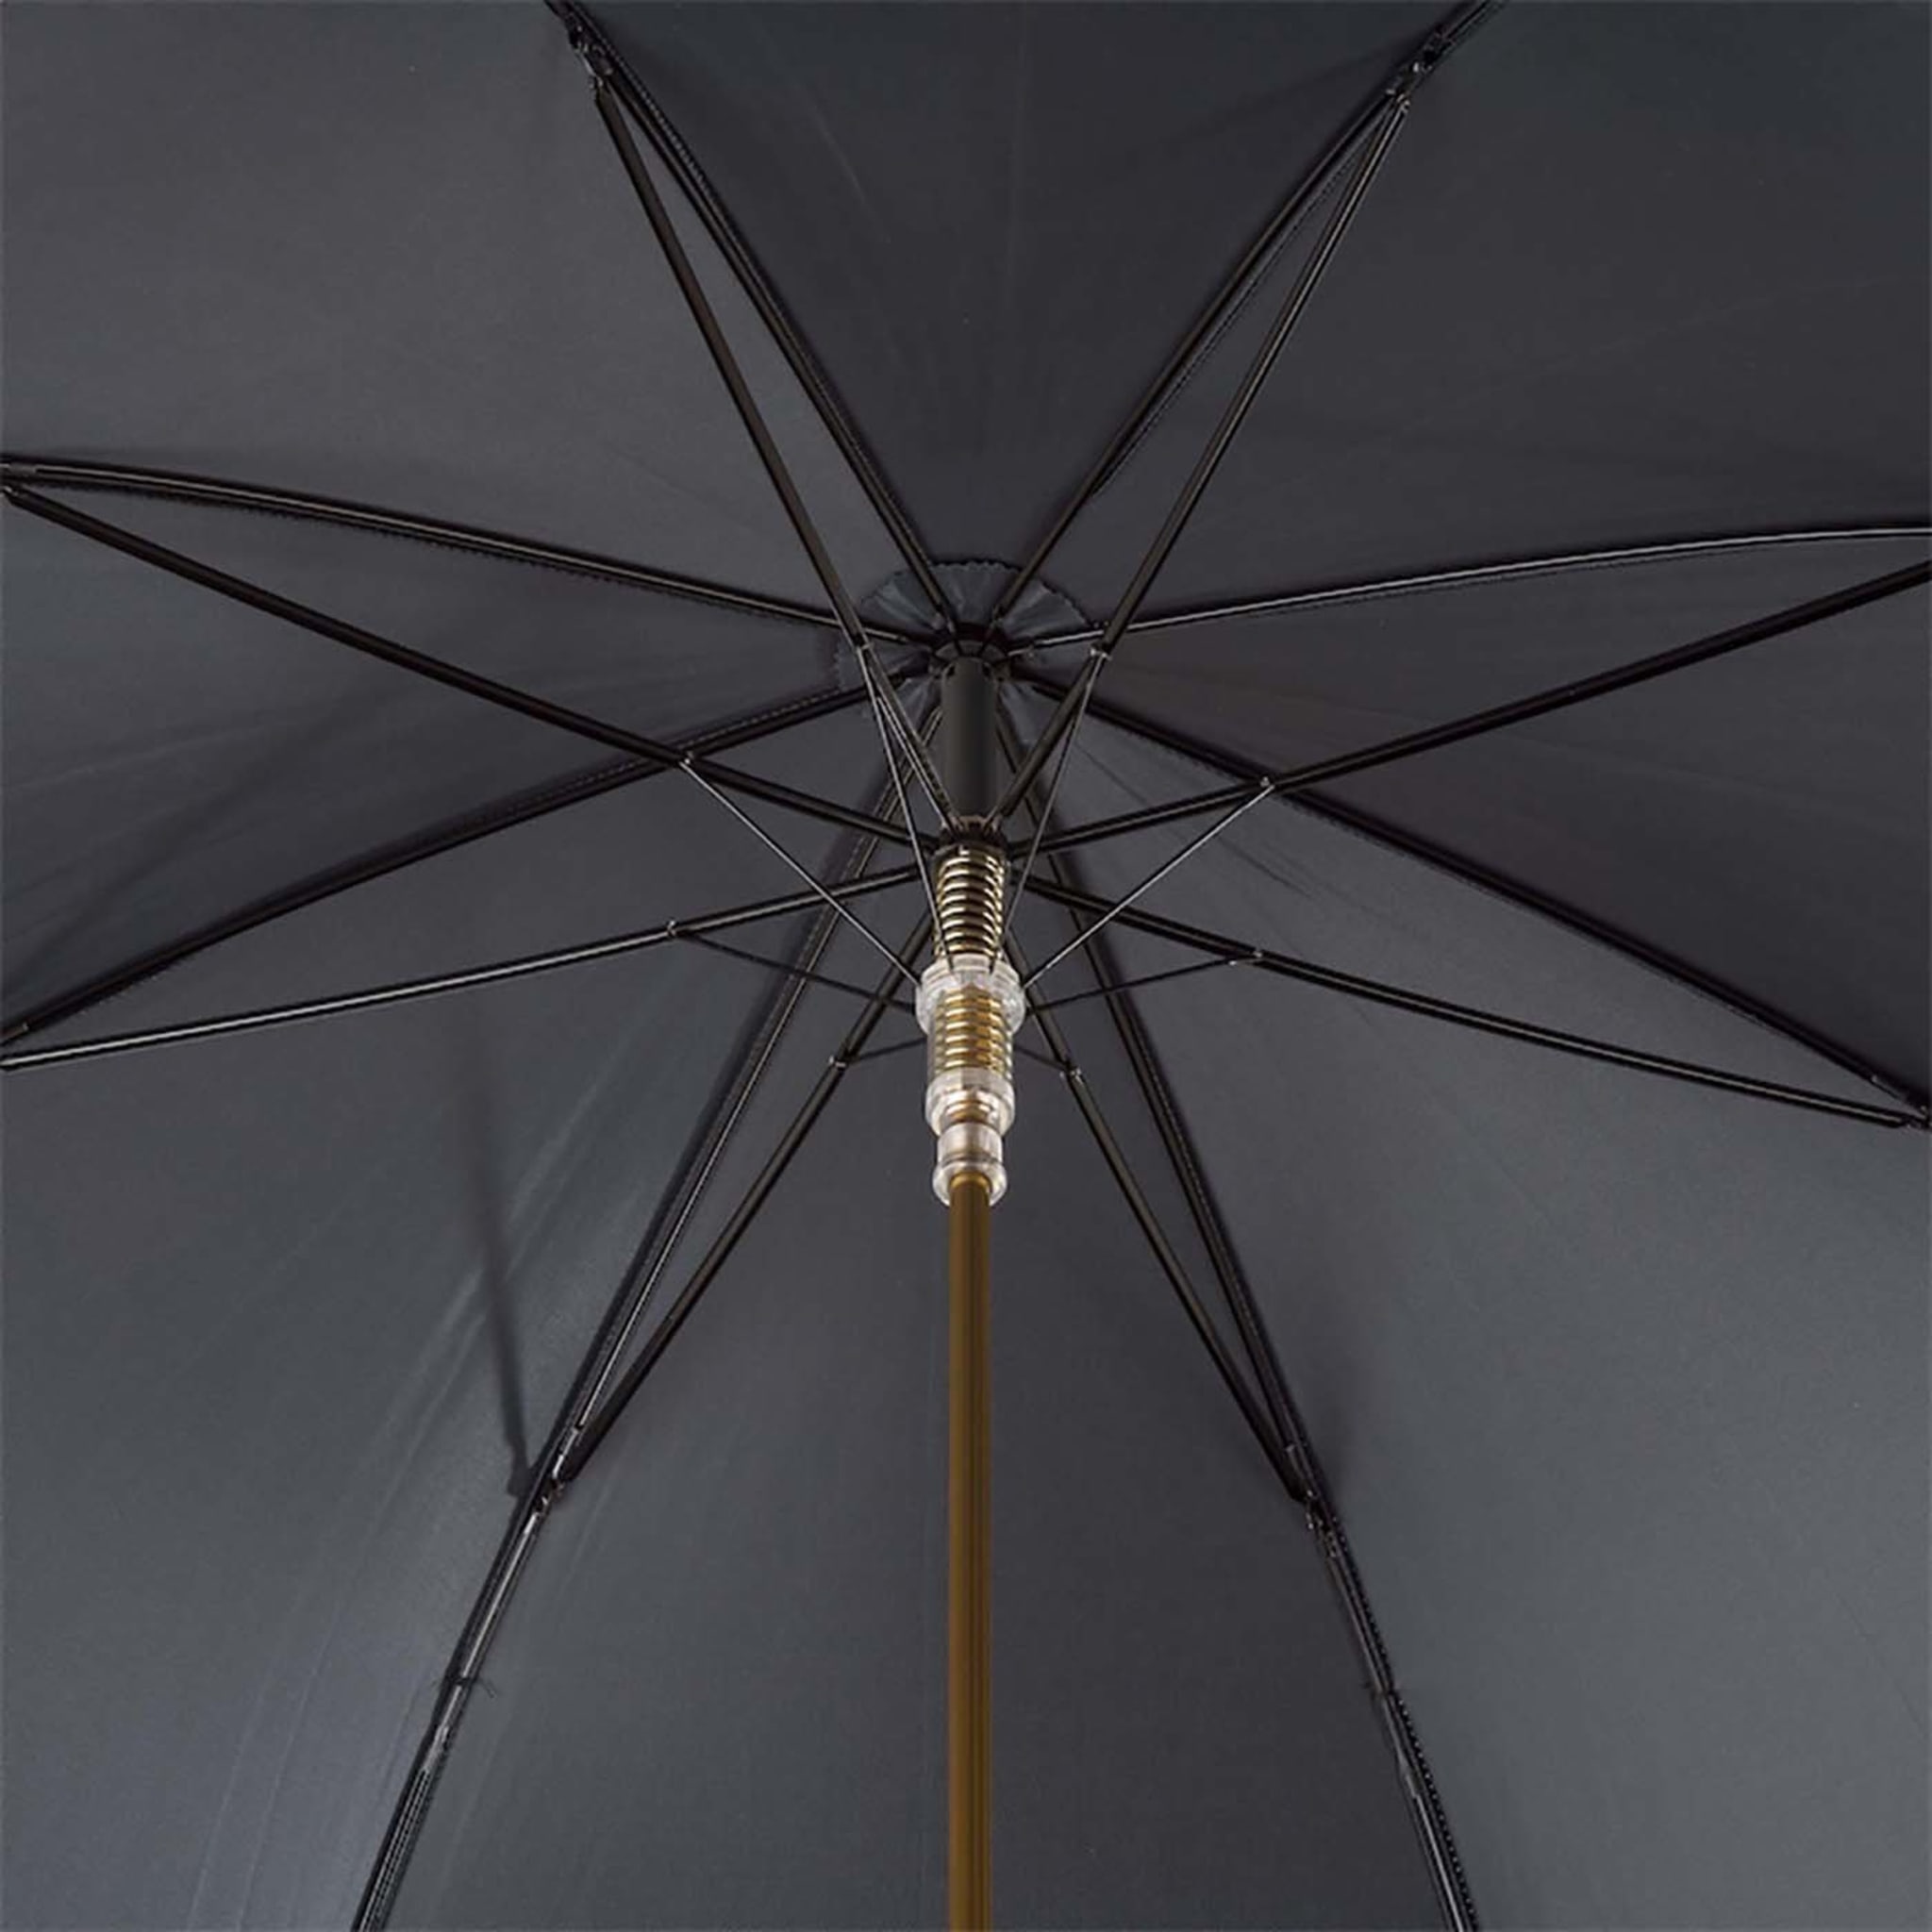 Black Umbrella with Rooster Handle - Alternative view 3